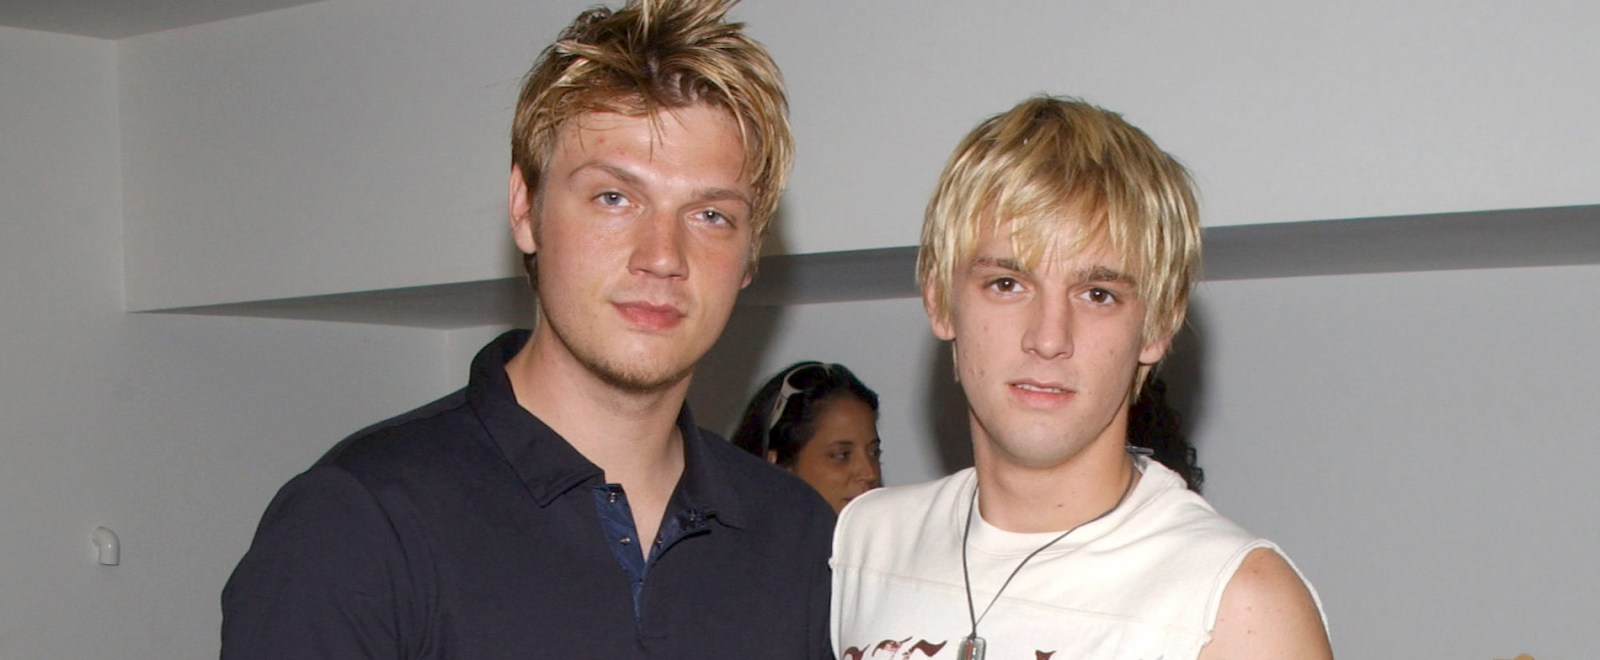 Backstreet Boys Paid Tribute To Aaron Carter After His Death